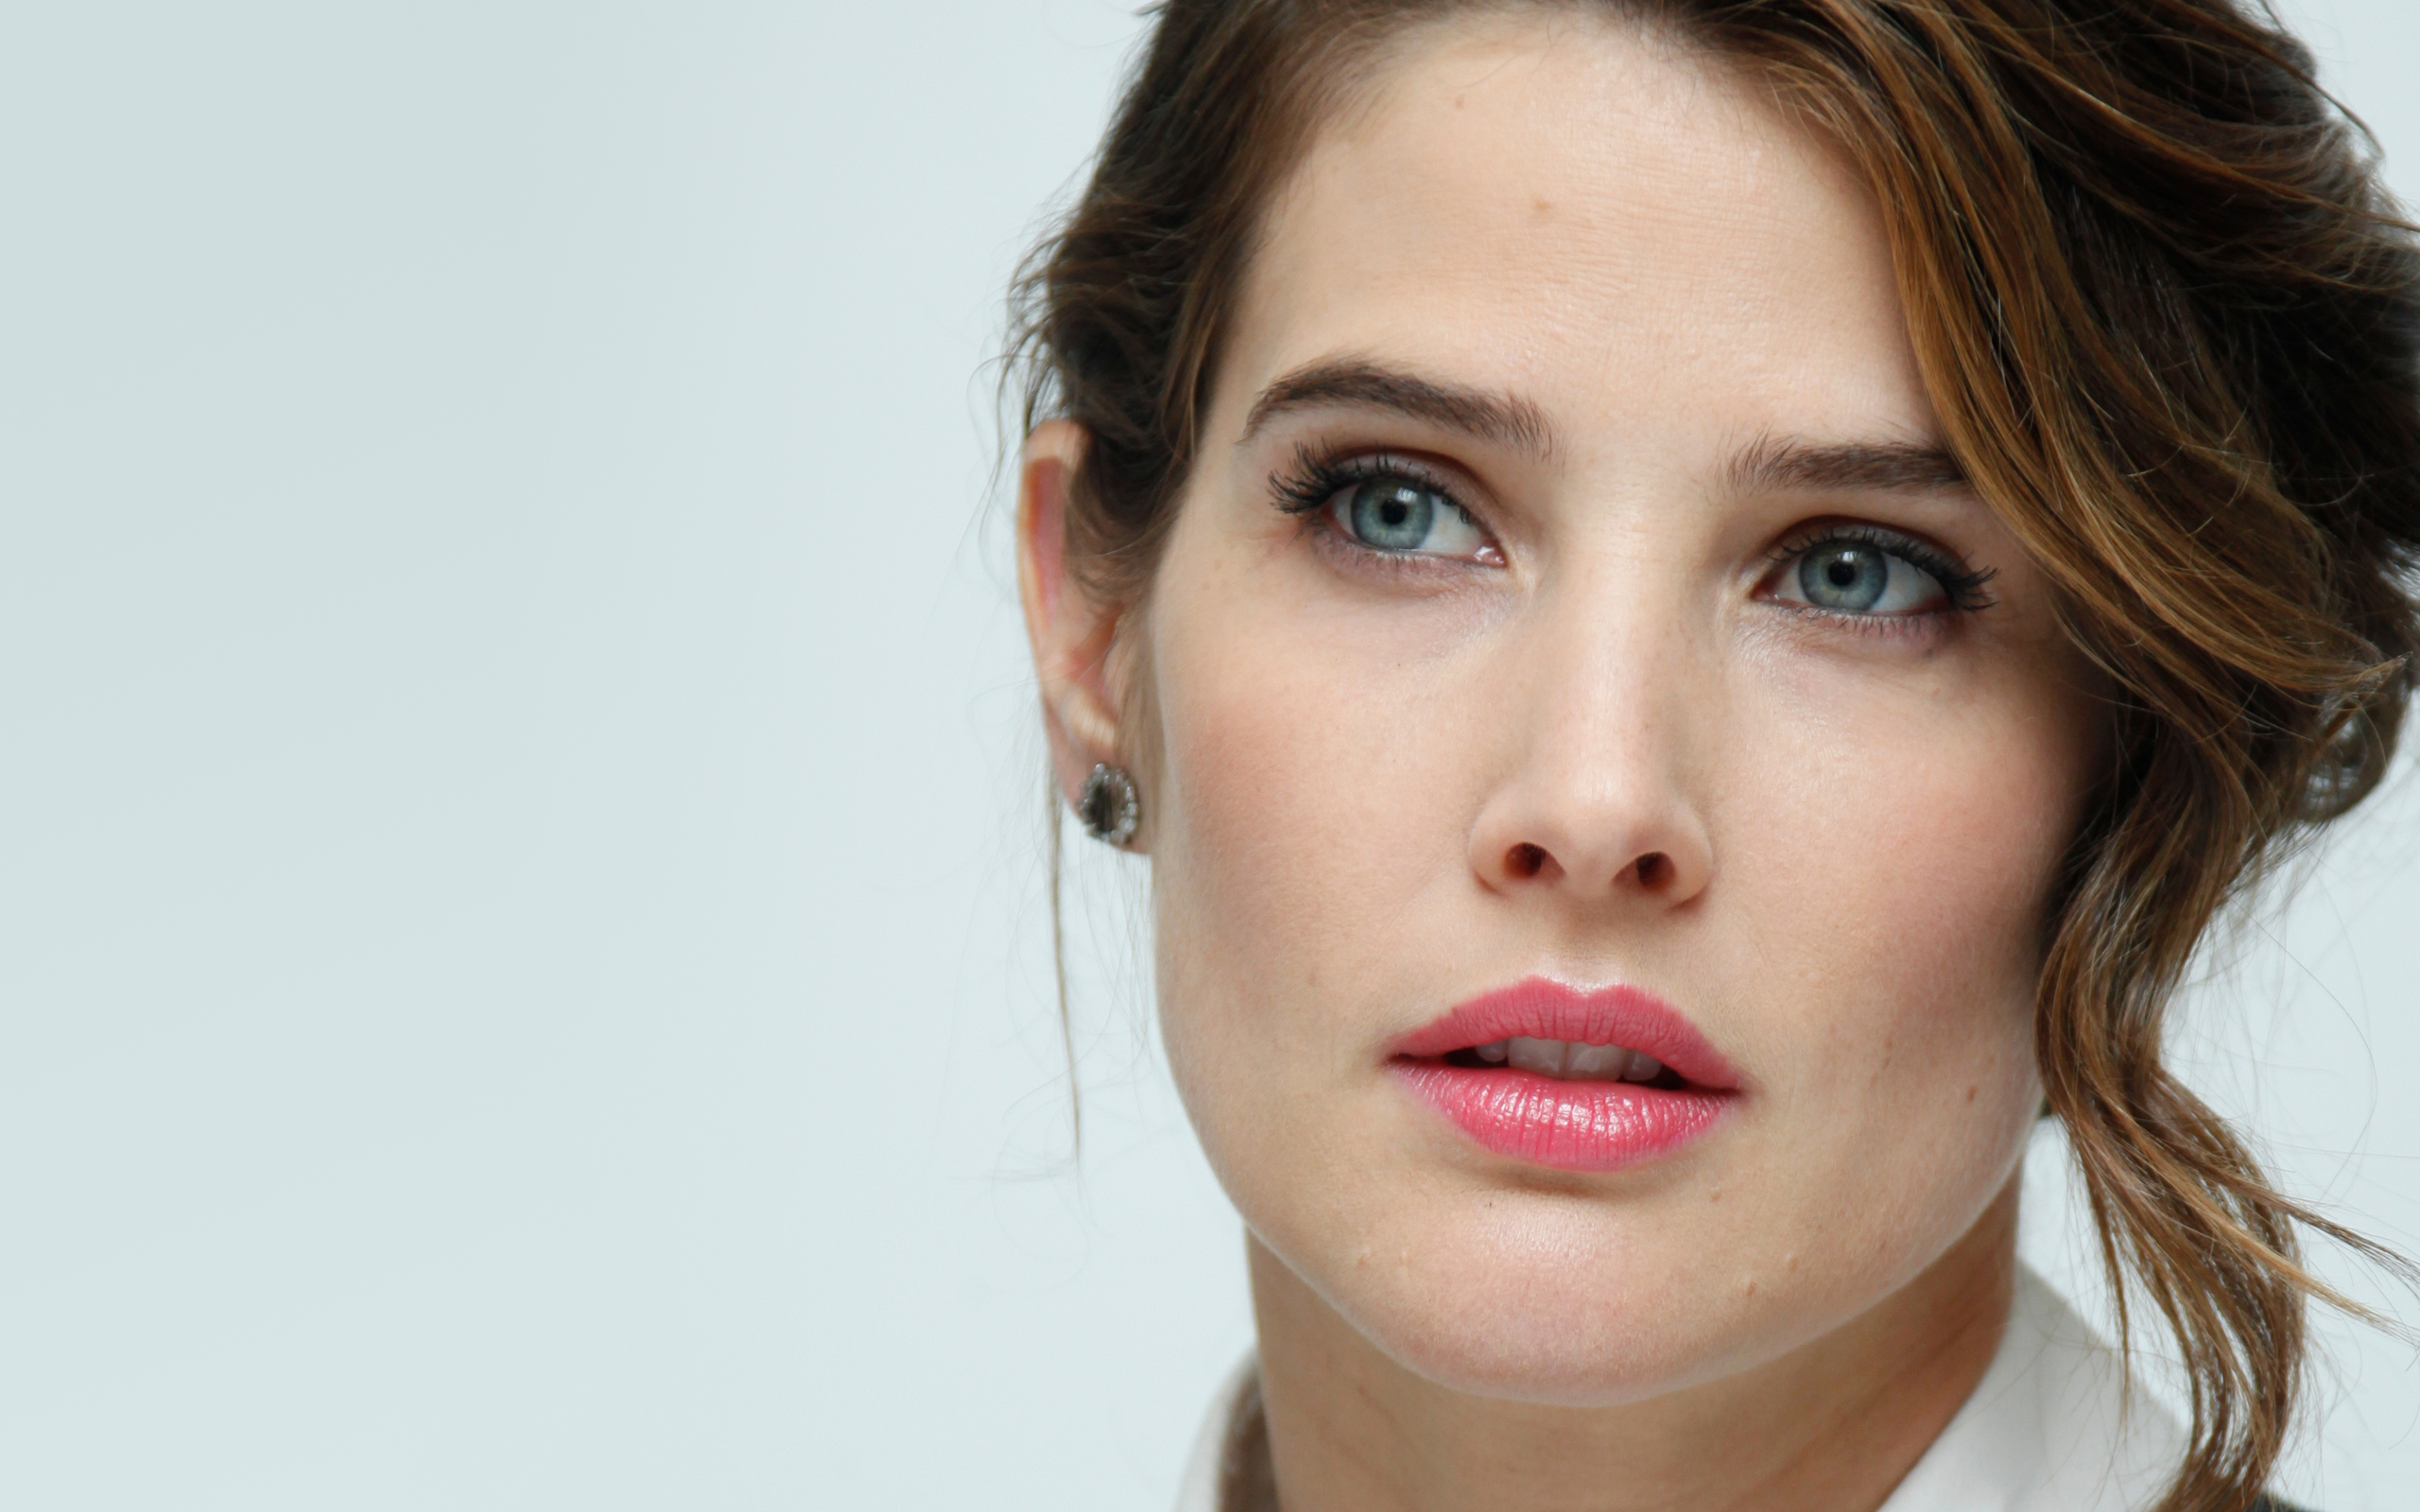 Cobie Smulders 2019 New Wallpapers